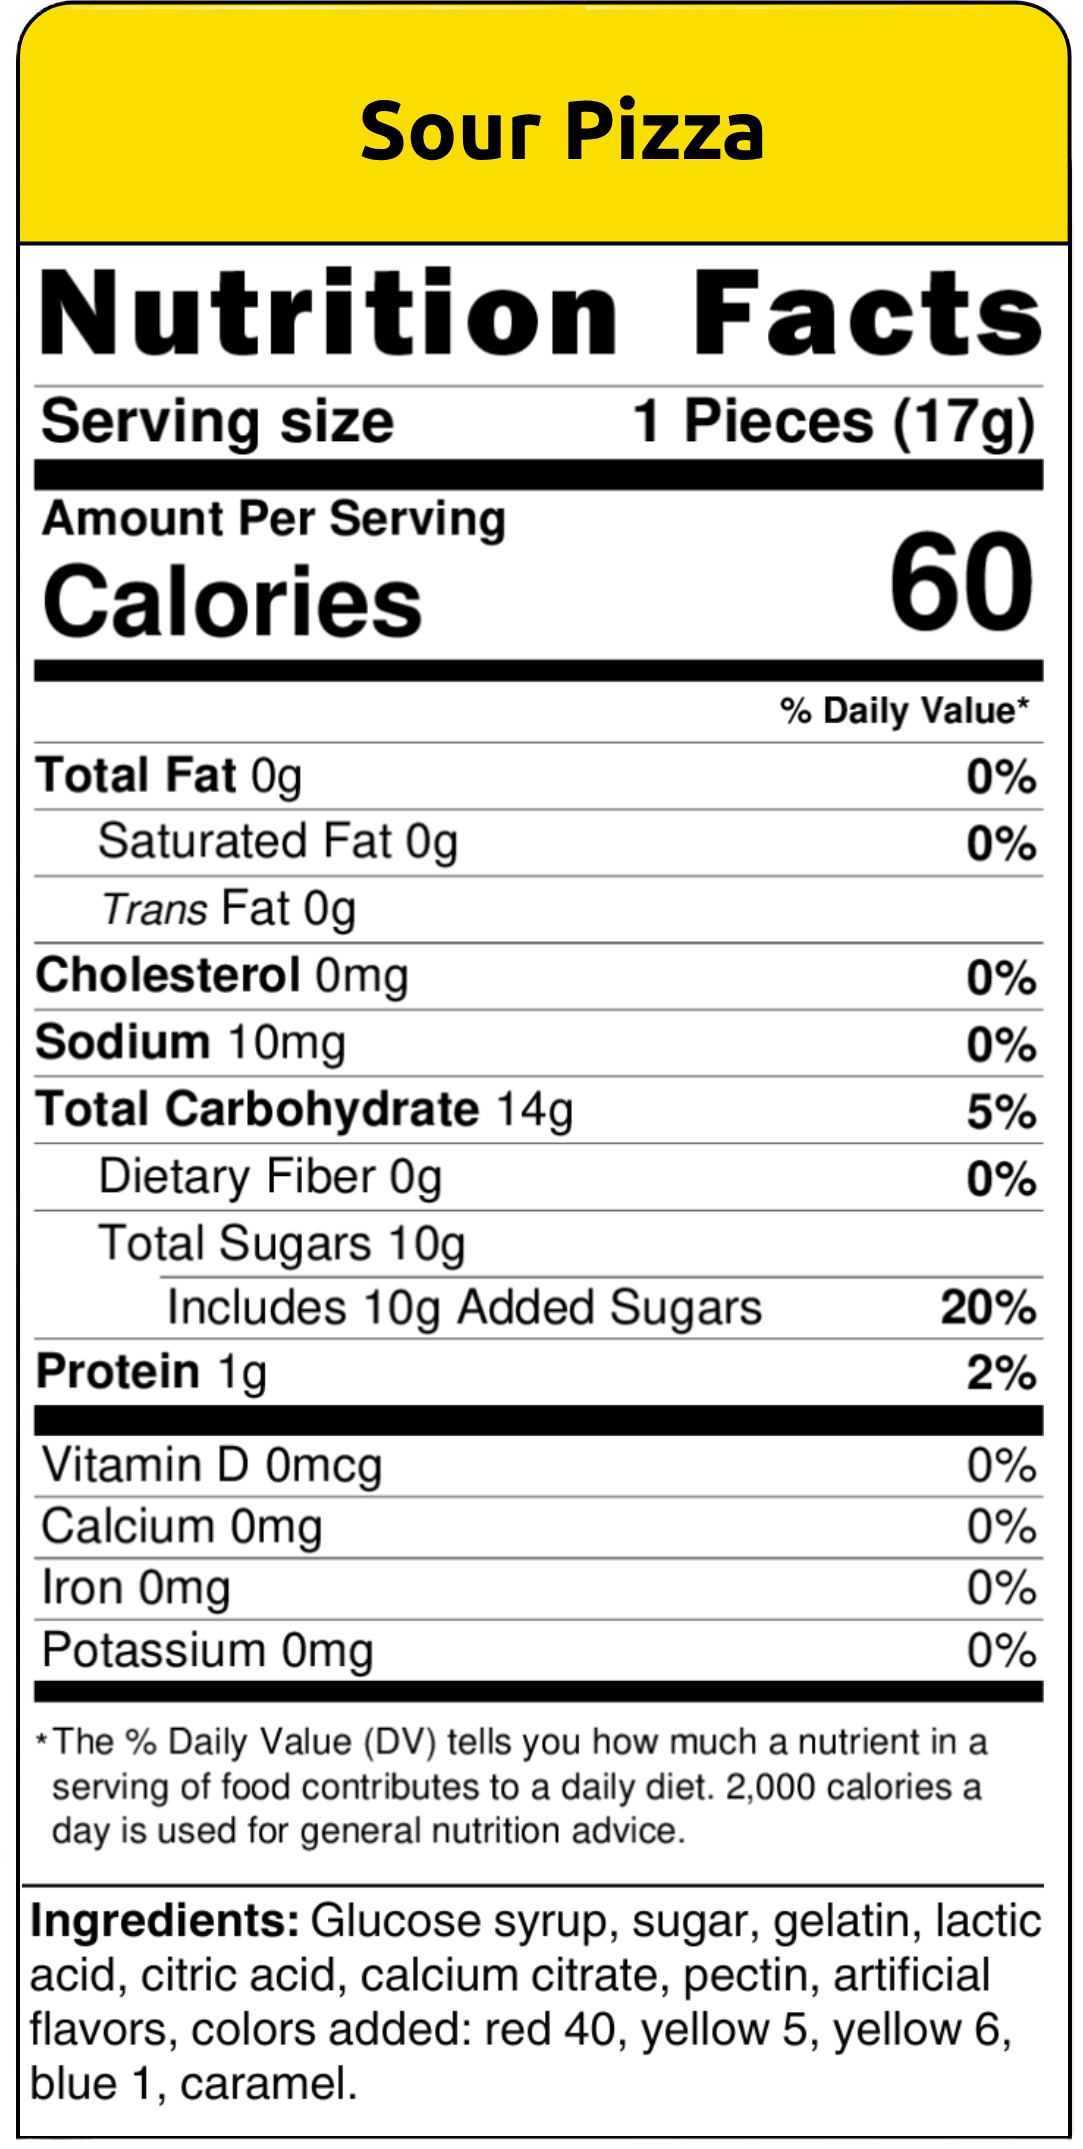 nutritional facts sour pizza